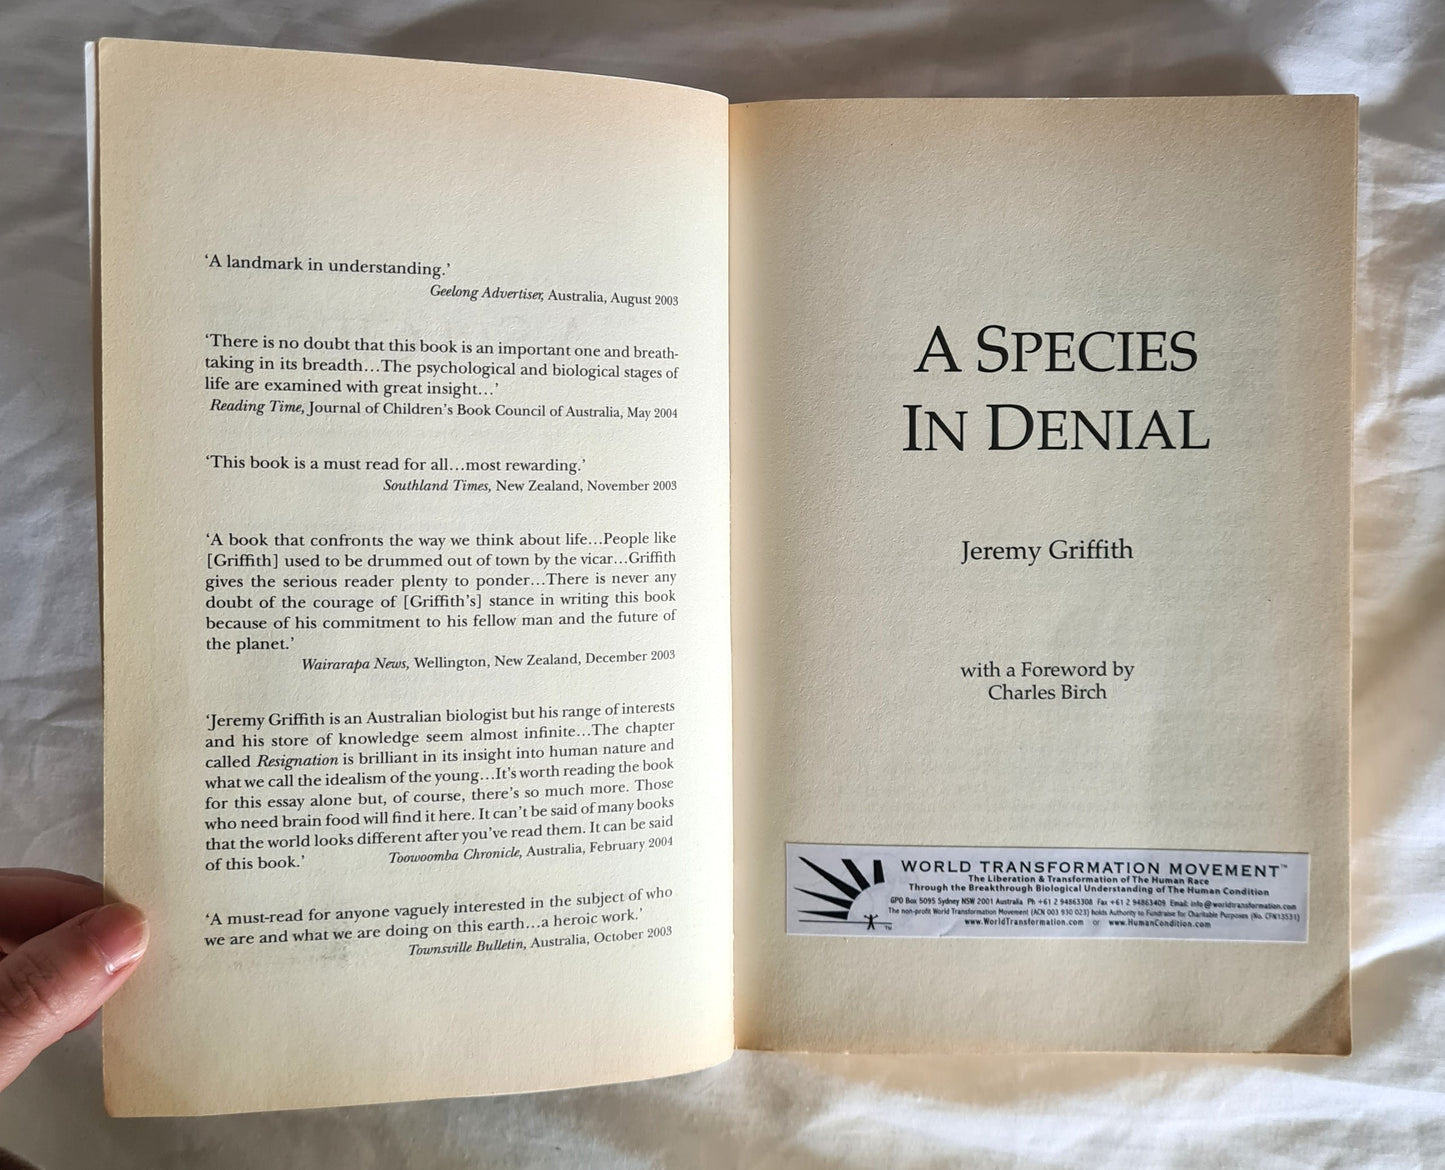 A Species in Denial by Jeremy Griffith